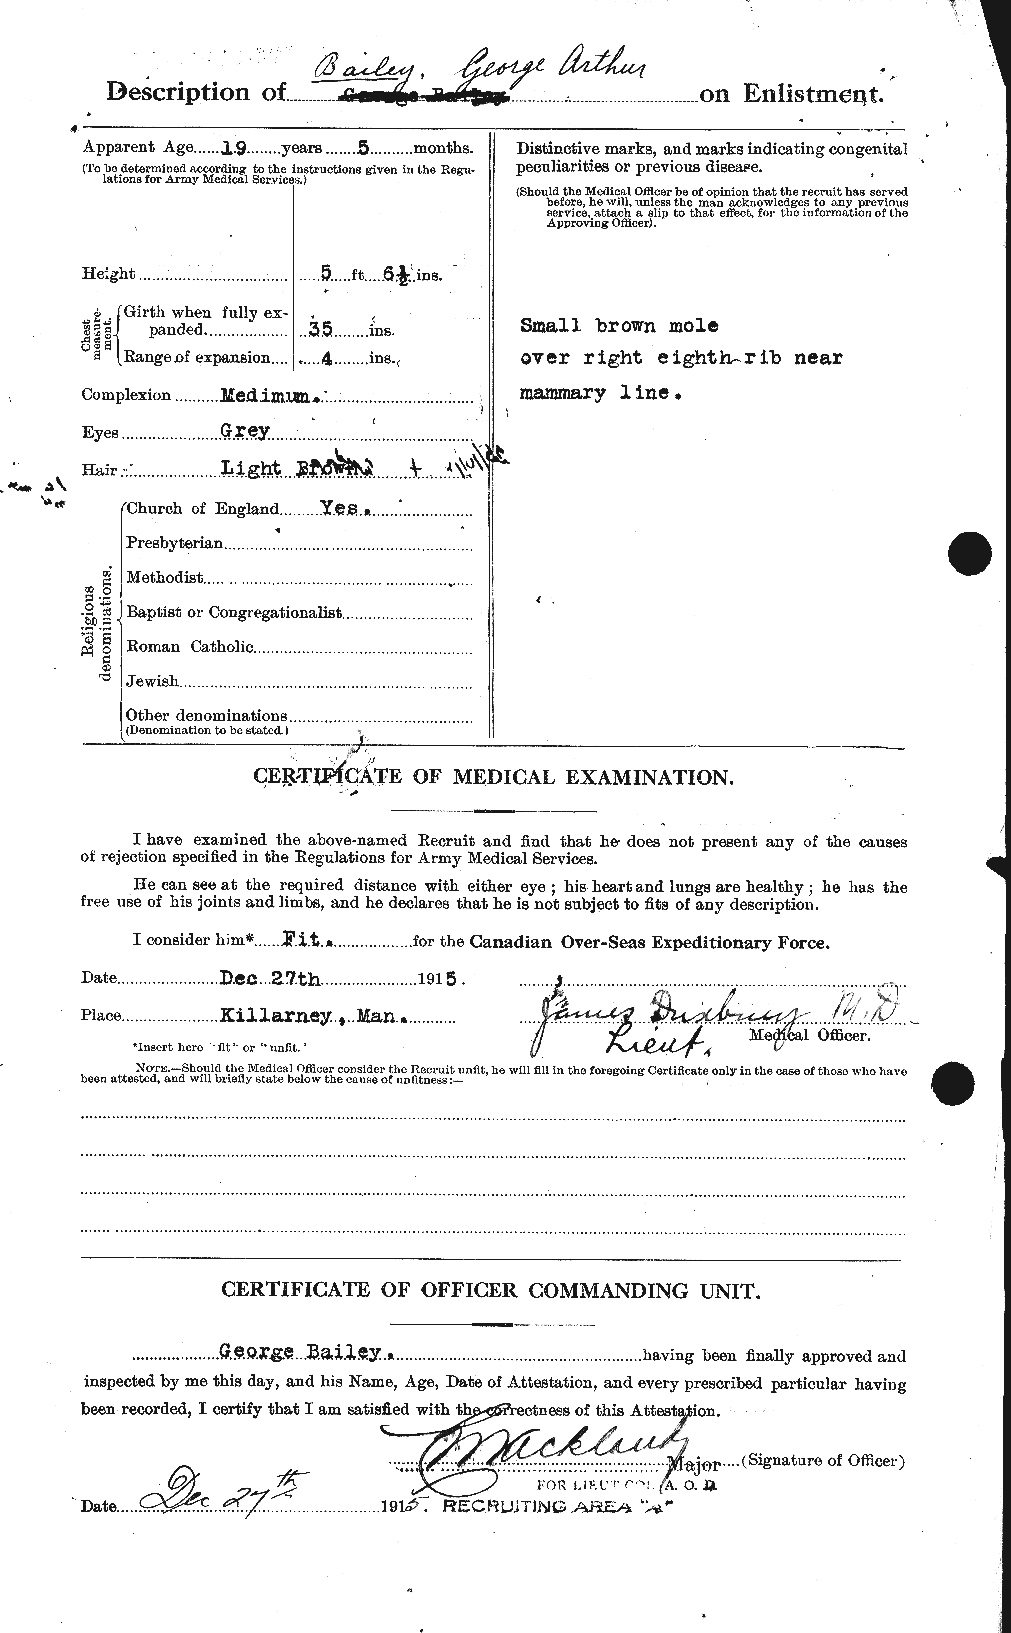 Personnel Records of the First World War - CEF 218953b